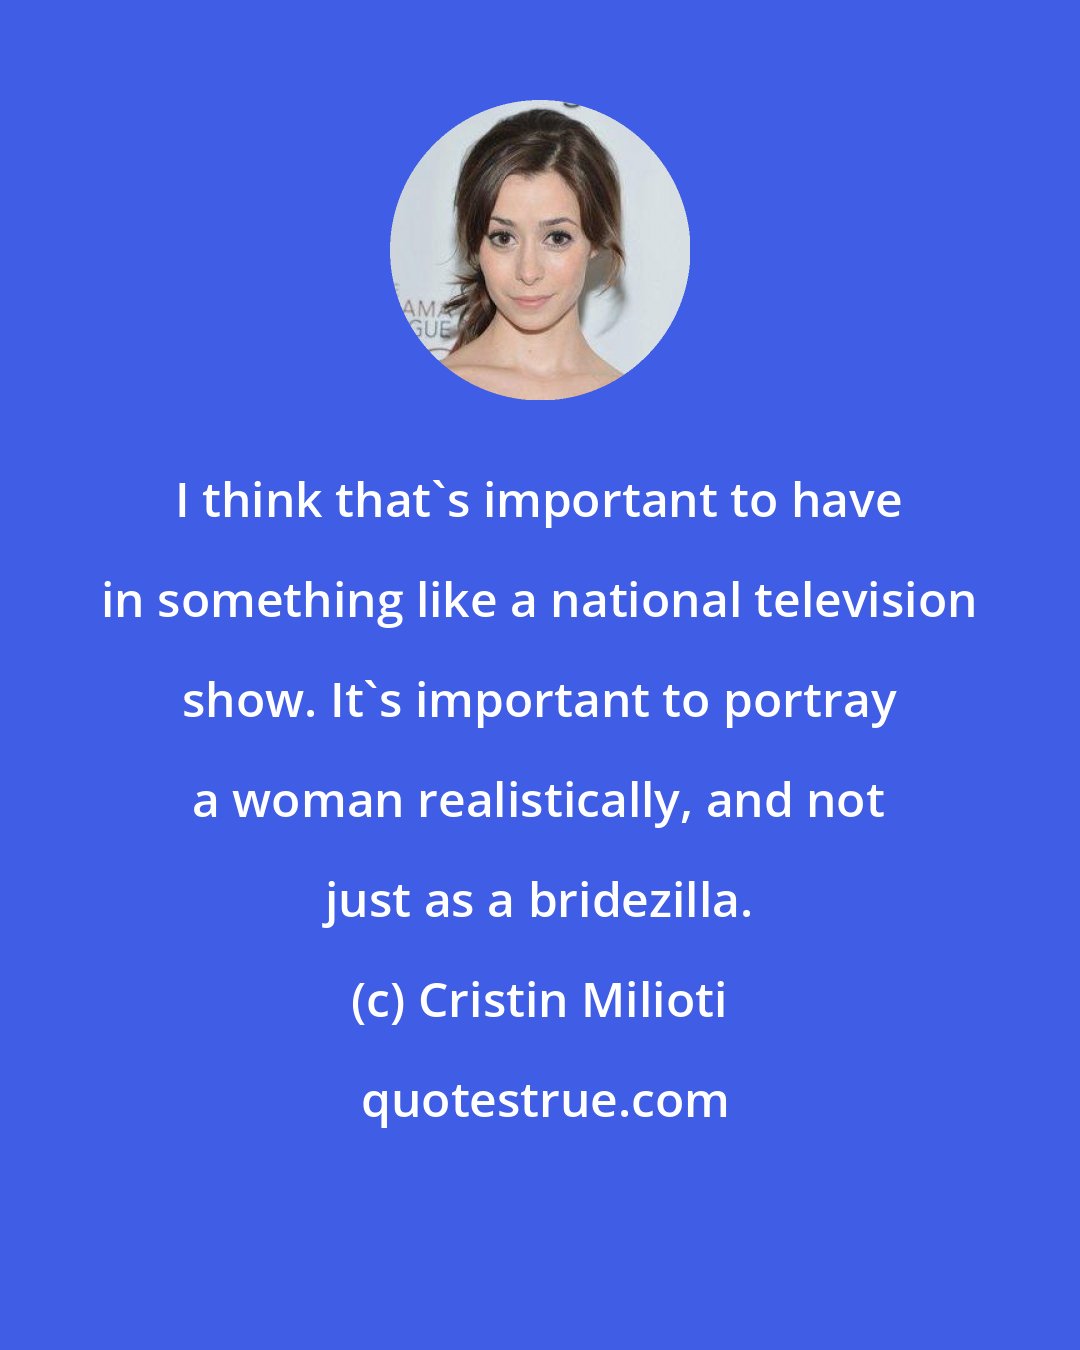 Cristin Milioti: I think that's important to have in something like a national television show. It's important to portray a woman realistically, and not just as a bridezilla.